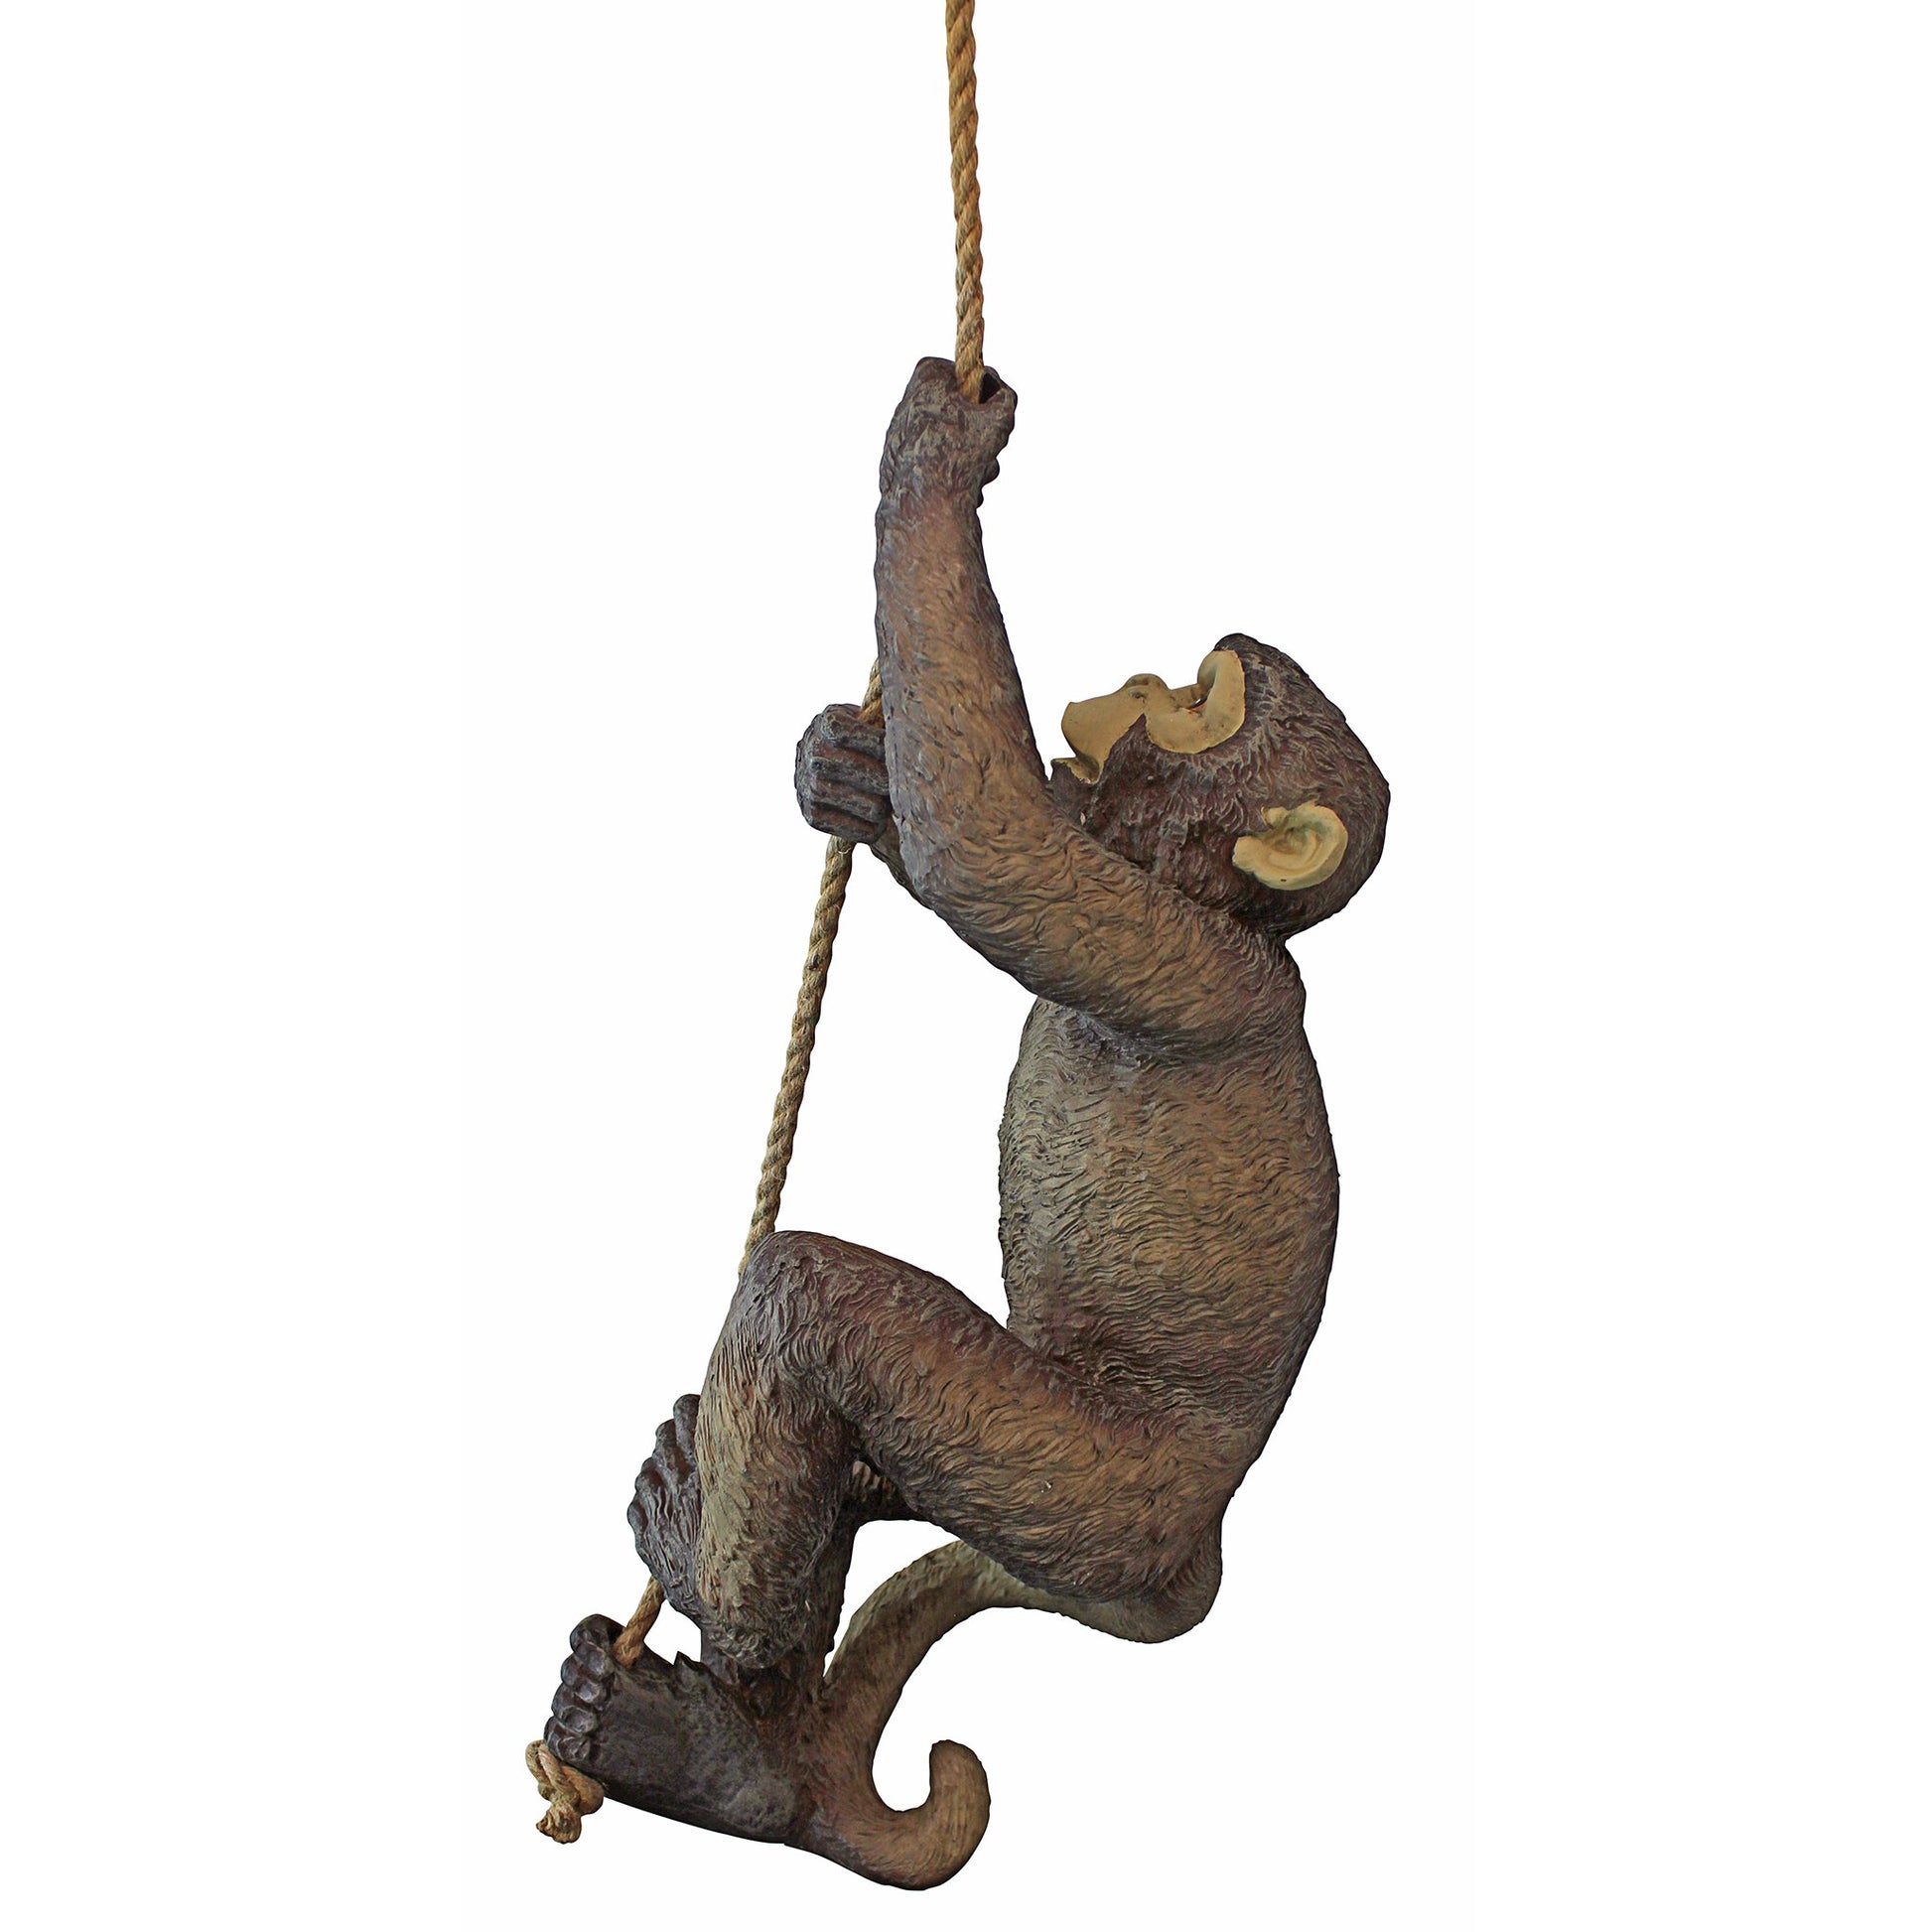 Left hand facing fake monkey made from resin climbing up a rope on a white background